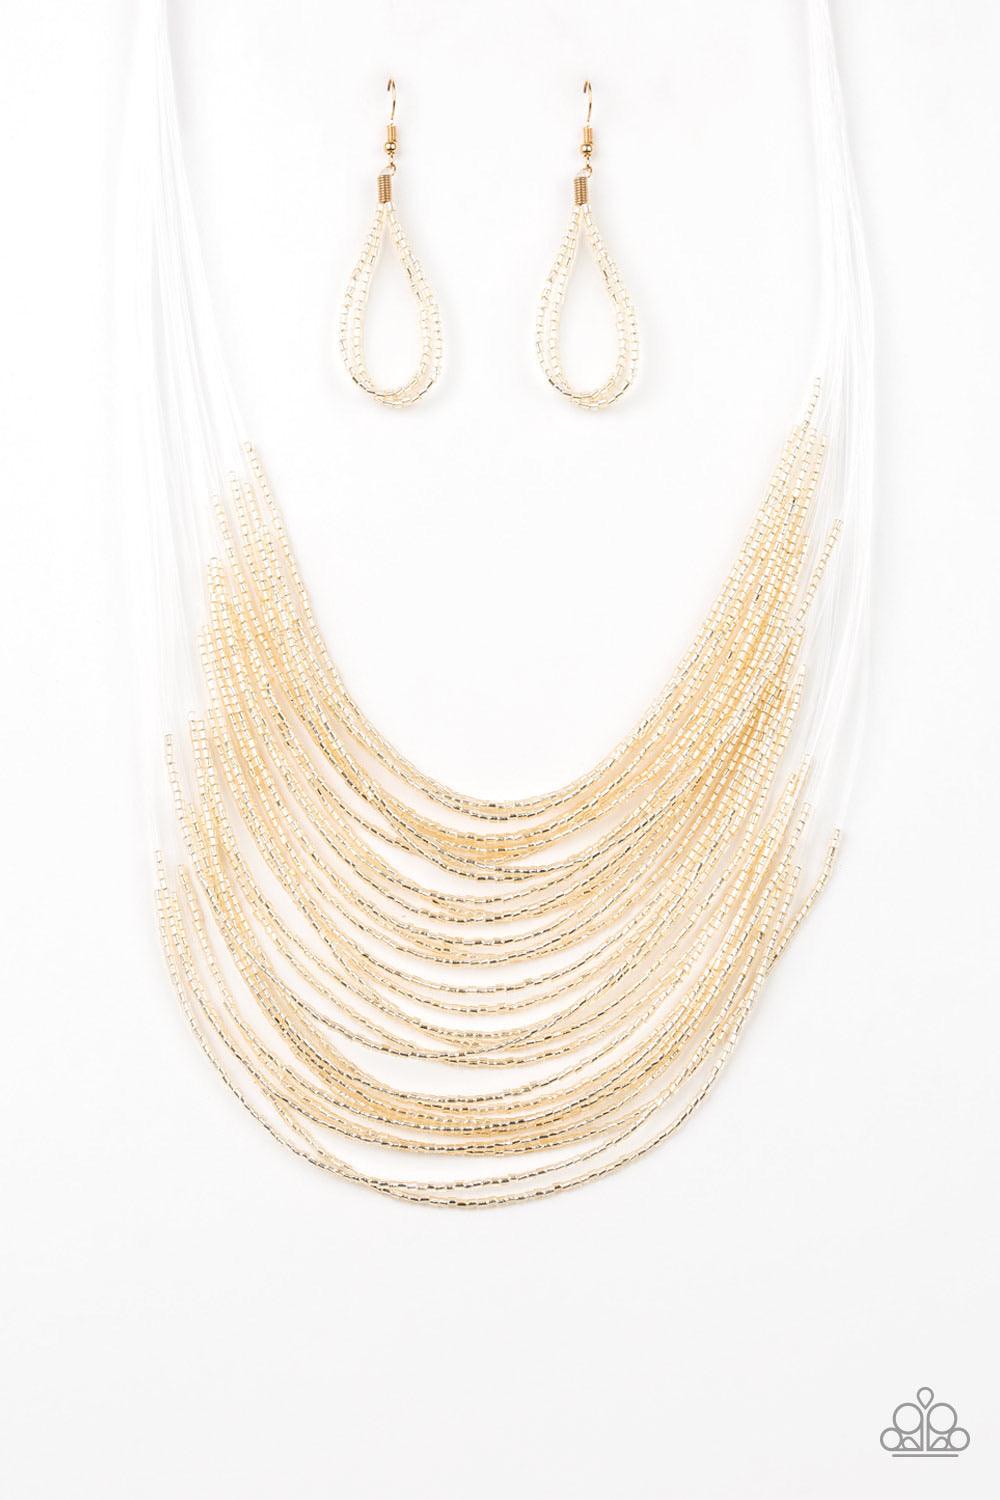 Paparazzi Accessories Catwalk Queen - Gold Strand after strand of metallic gold seed beads fall together to create a bold statement piece. Features an adjustable clasp closure. Sold as one individual necklace. Includes one pair of matching earrings. Jewel